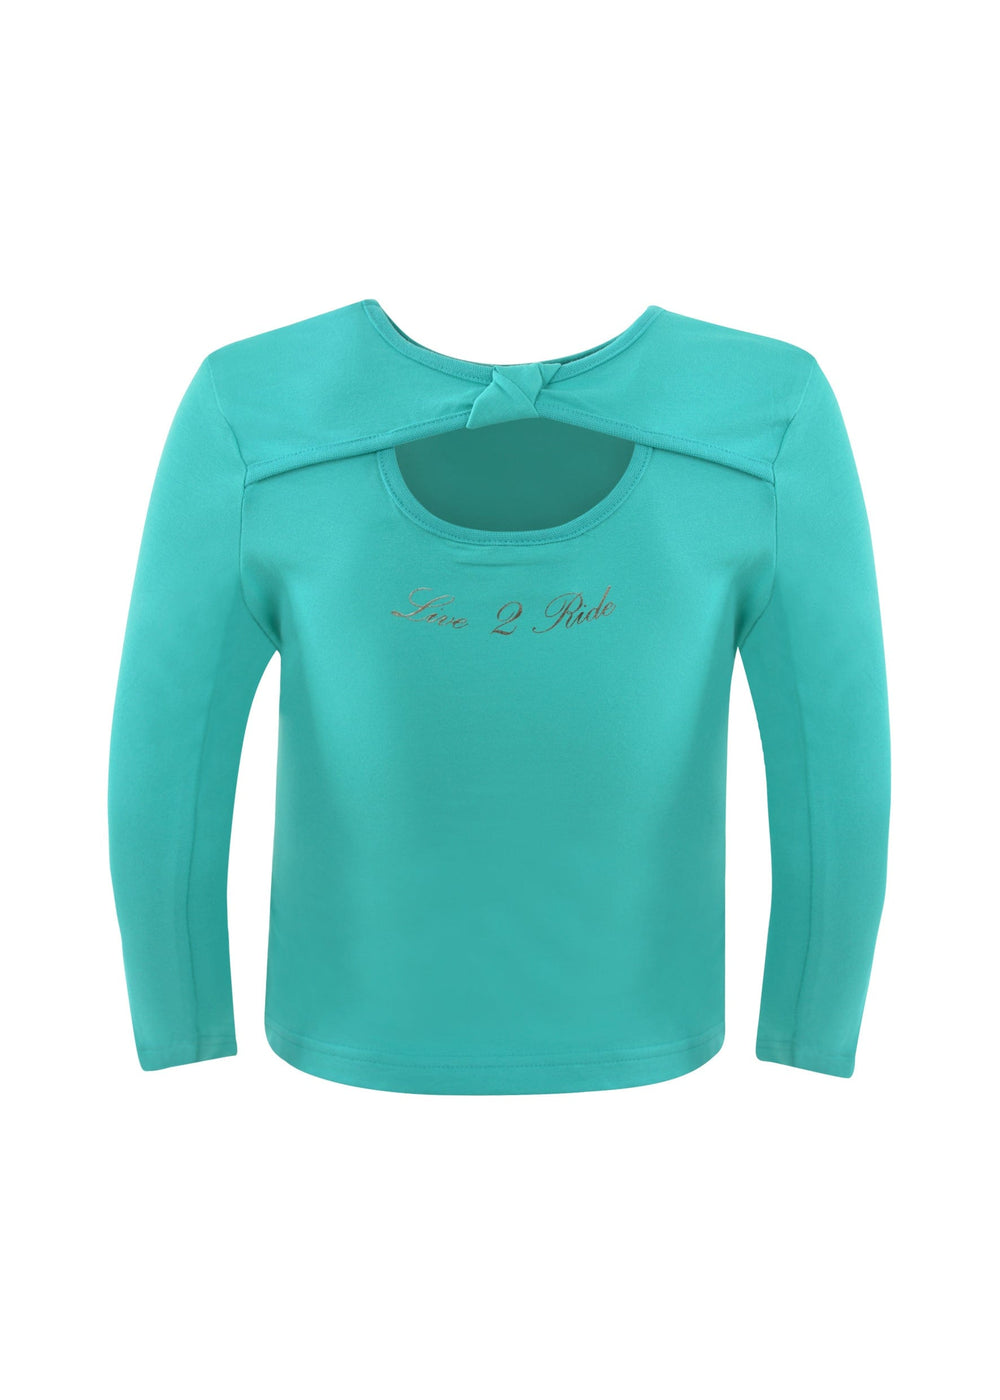 THOMAS COOK BOOTS AND CLOTHING TOP T1W5507133 Toby Horse Long Sleeve Top | Aqua